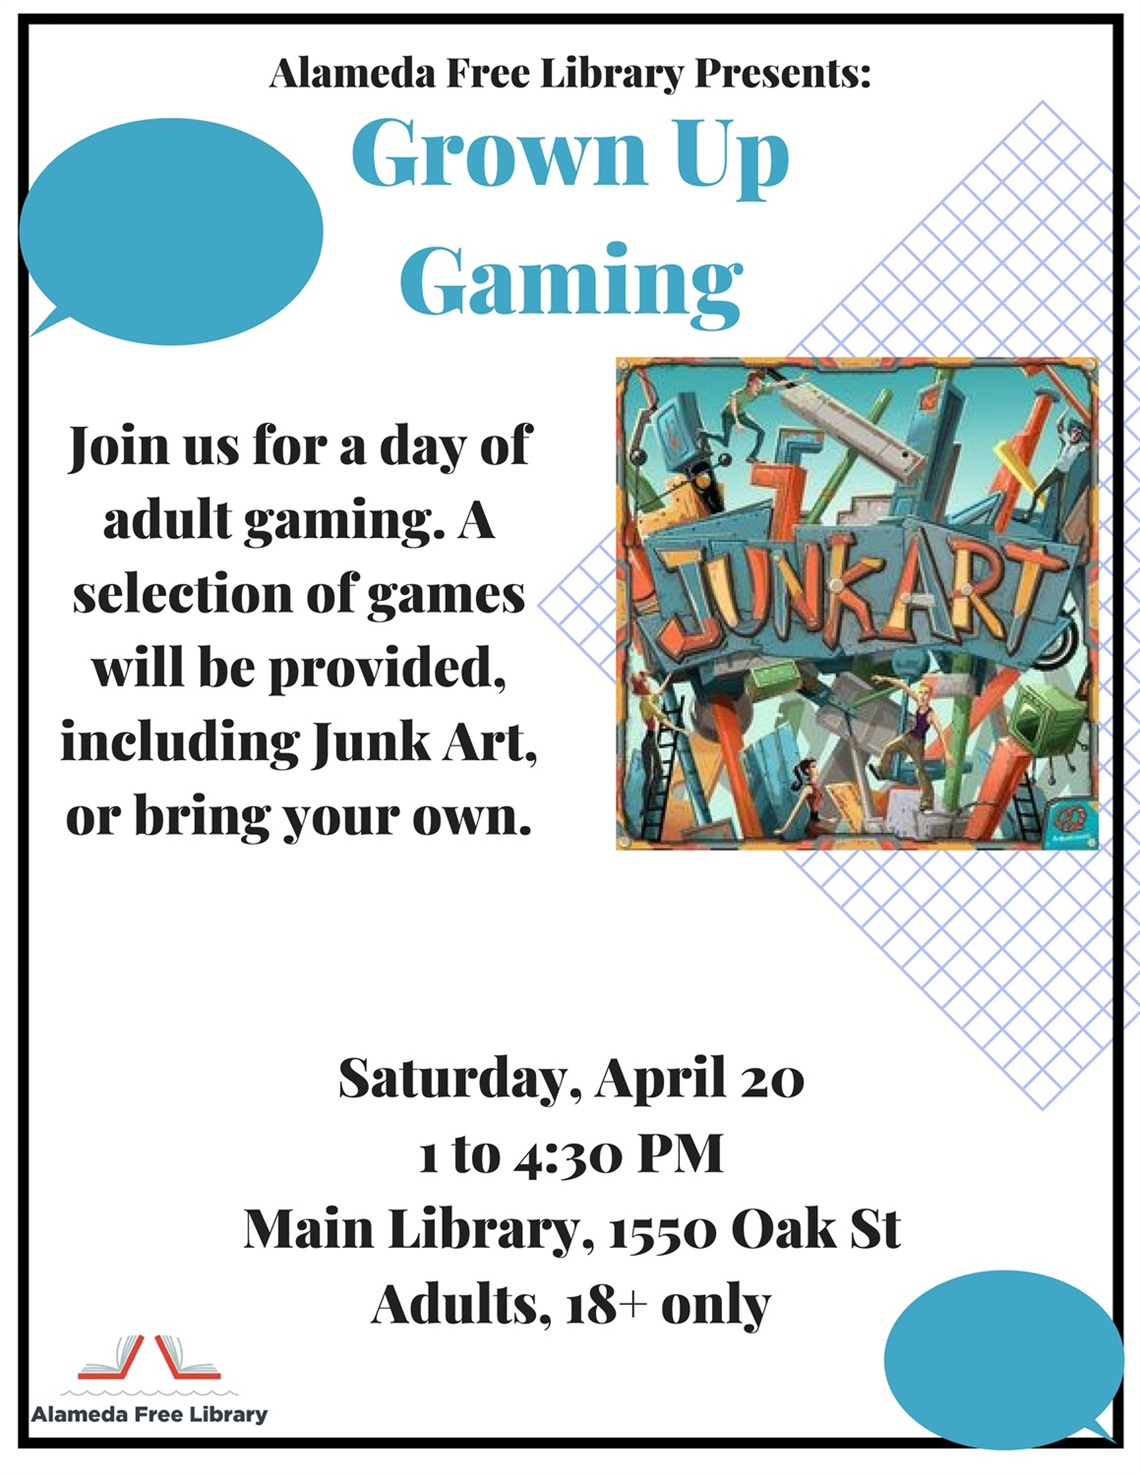 Grown Up Gaming Flyer for April 20 event